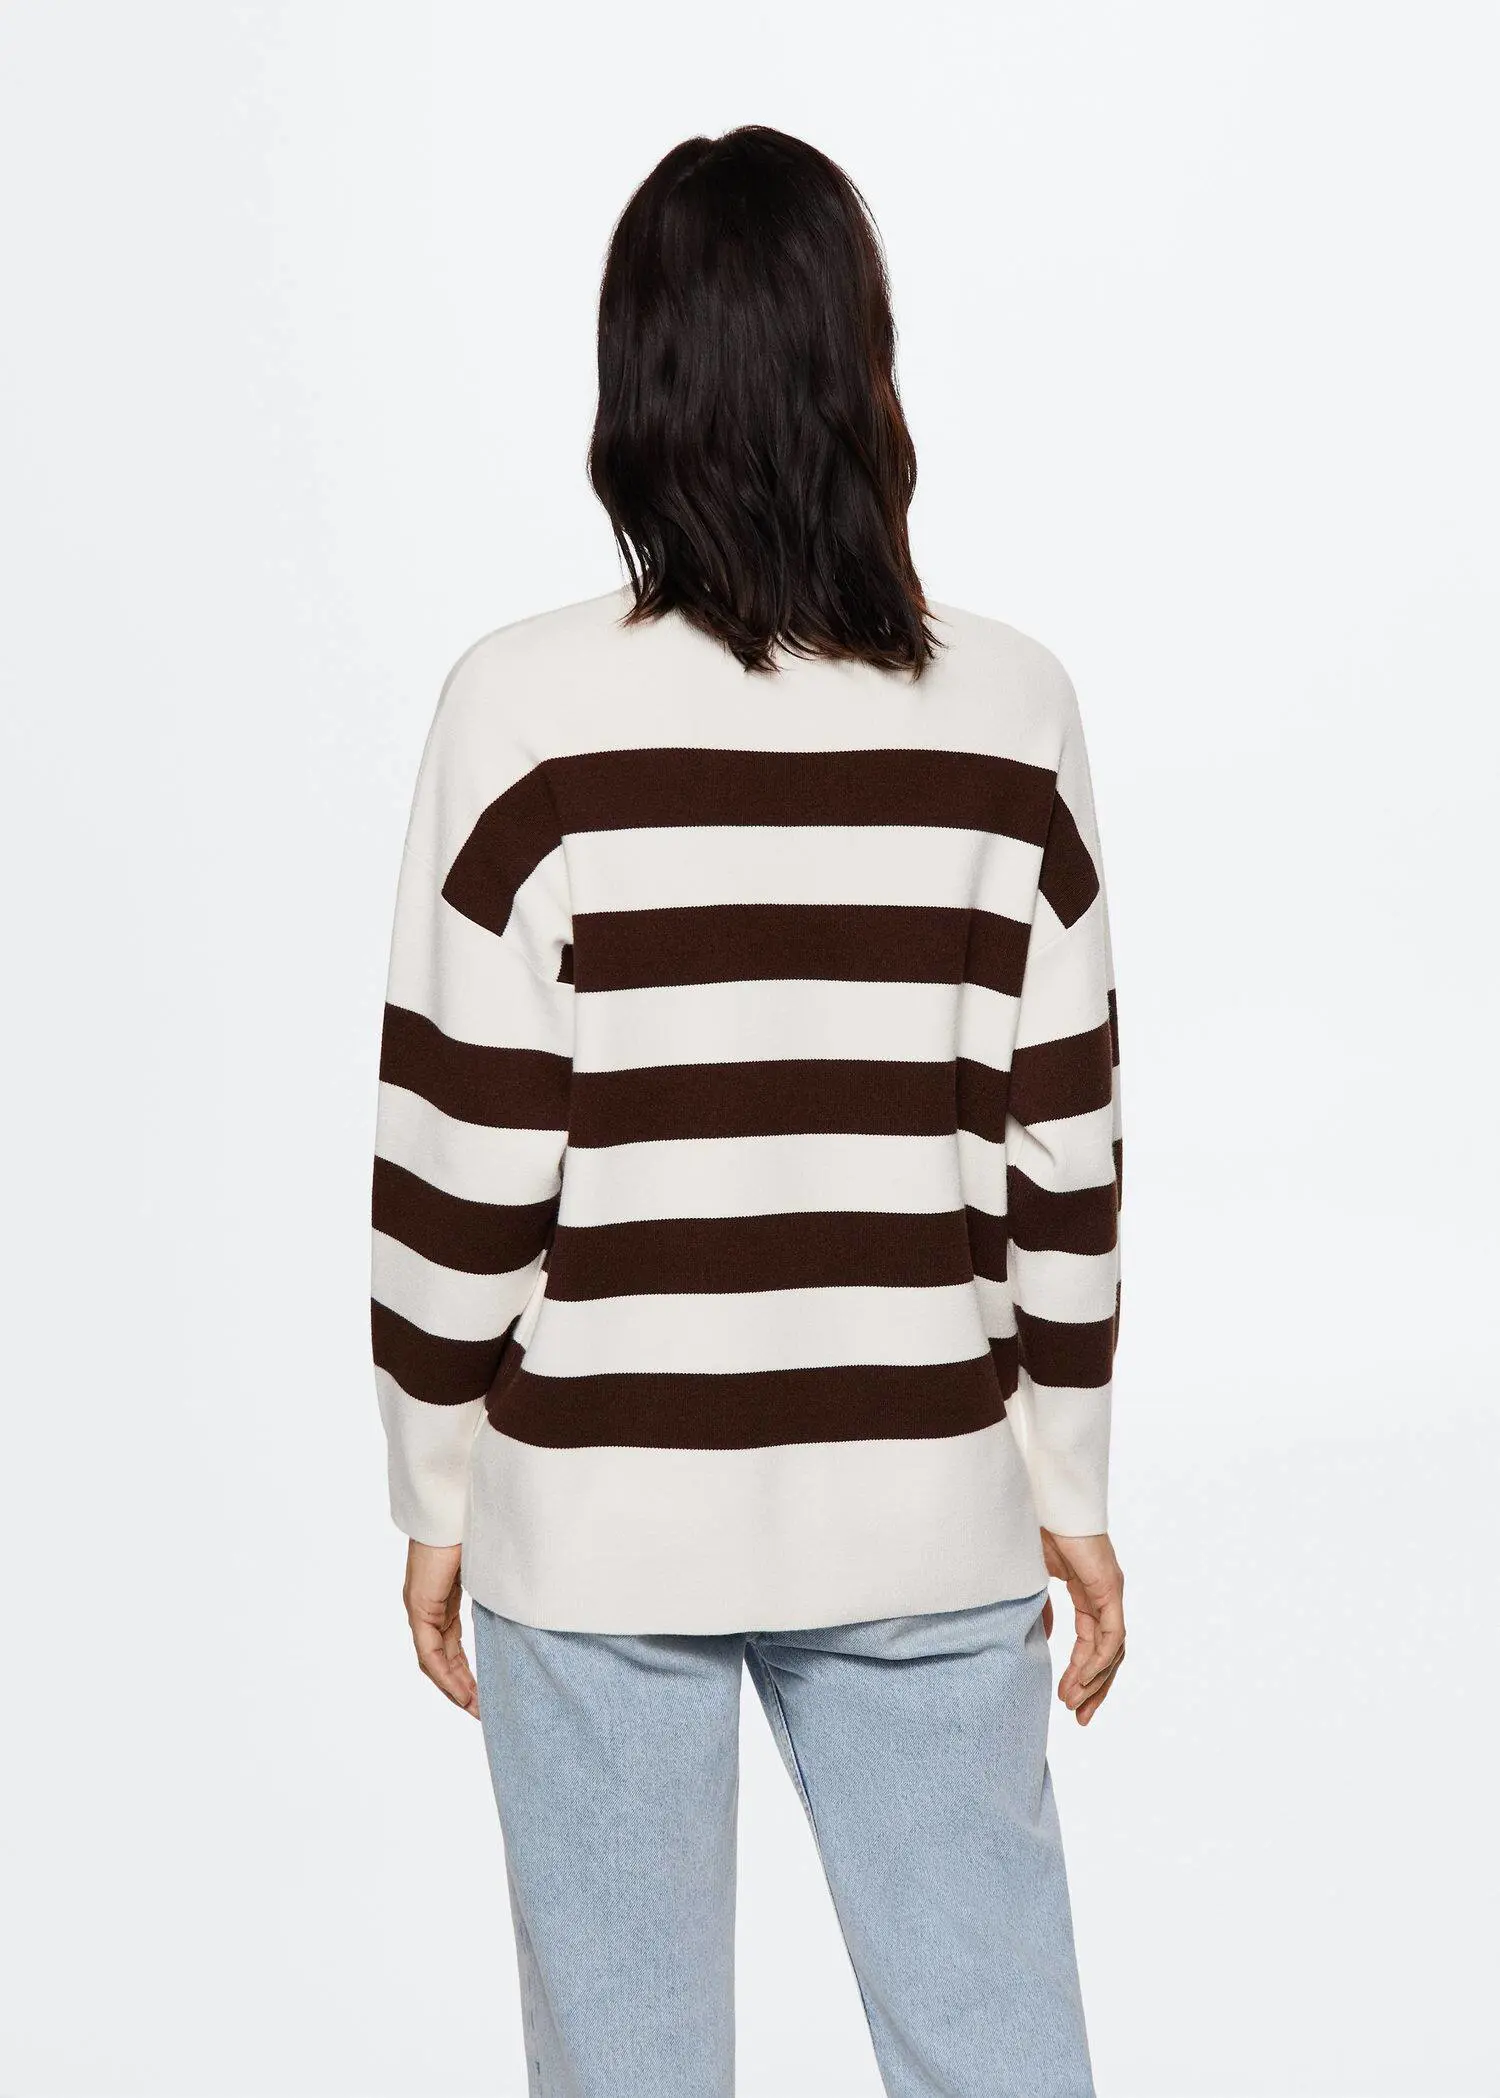 Mango Striped knit sweater. a person wearing a striped sweater and jeans. 